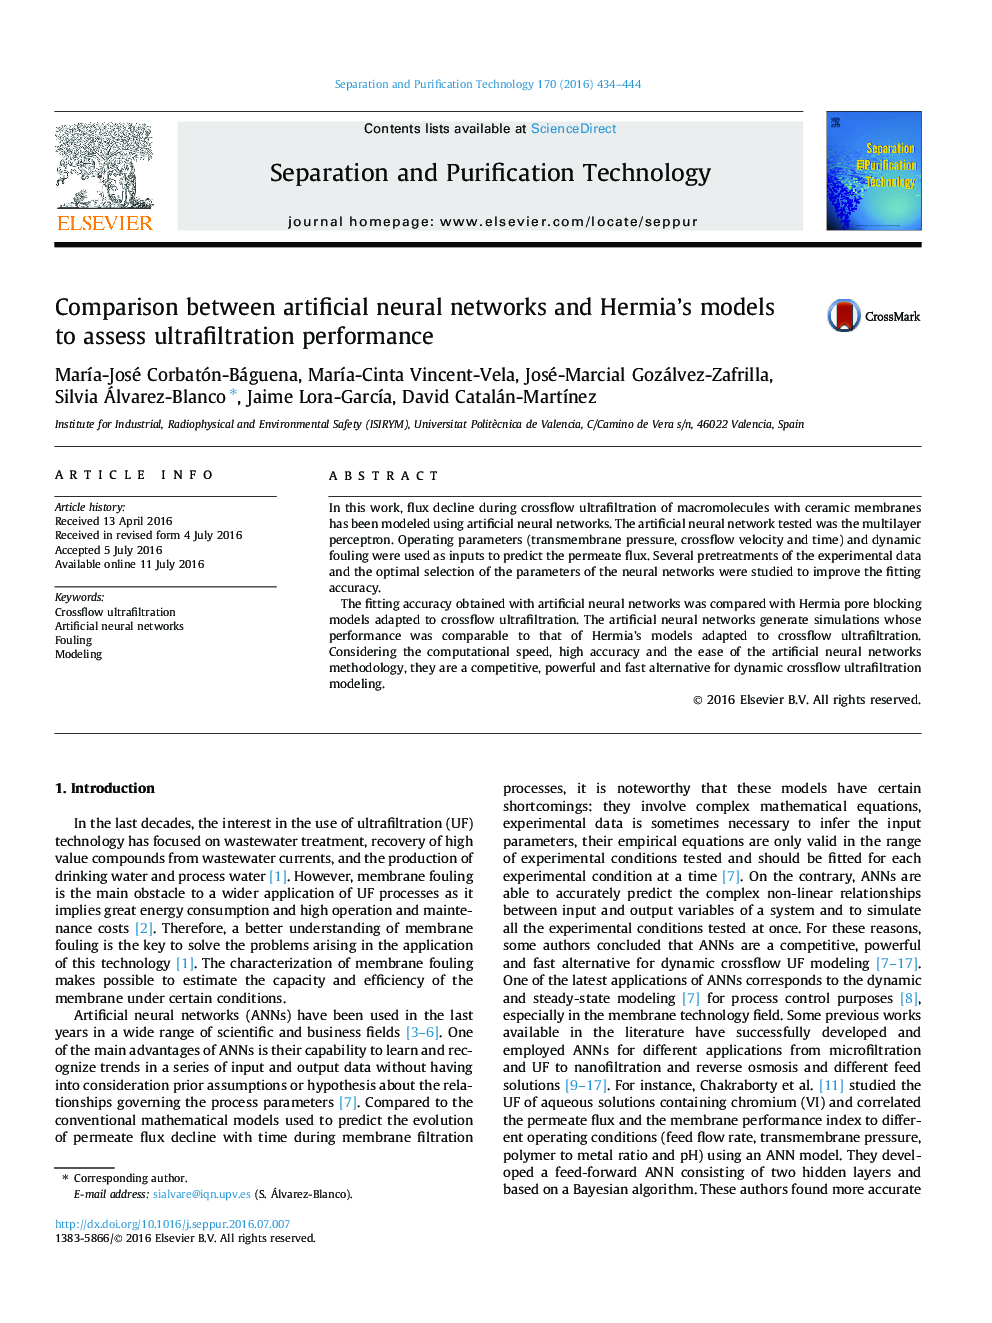 Comparison between artificial neural networks and Hermia’s models to assess ultrafiltration performance